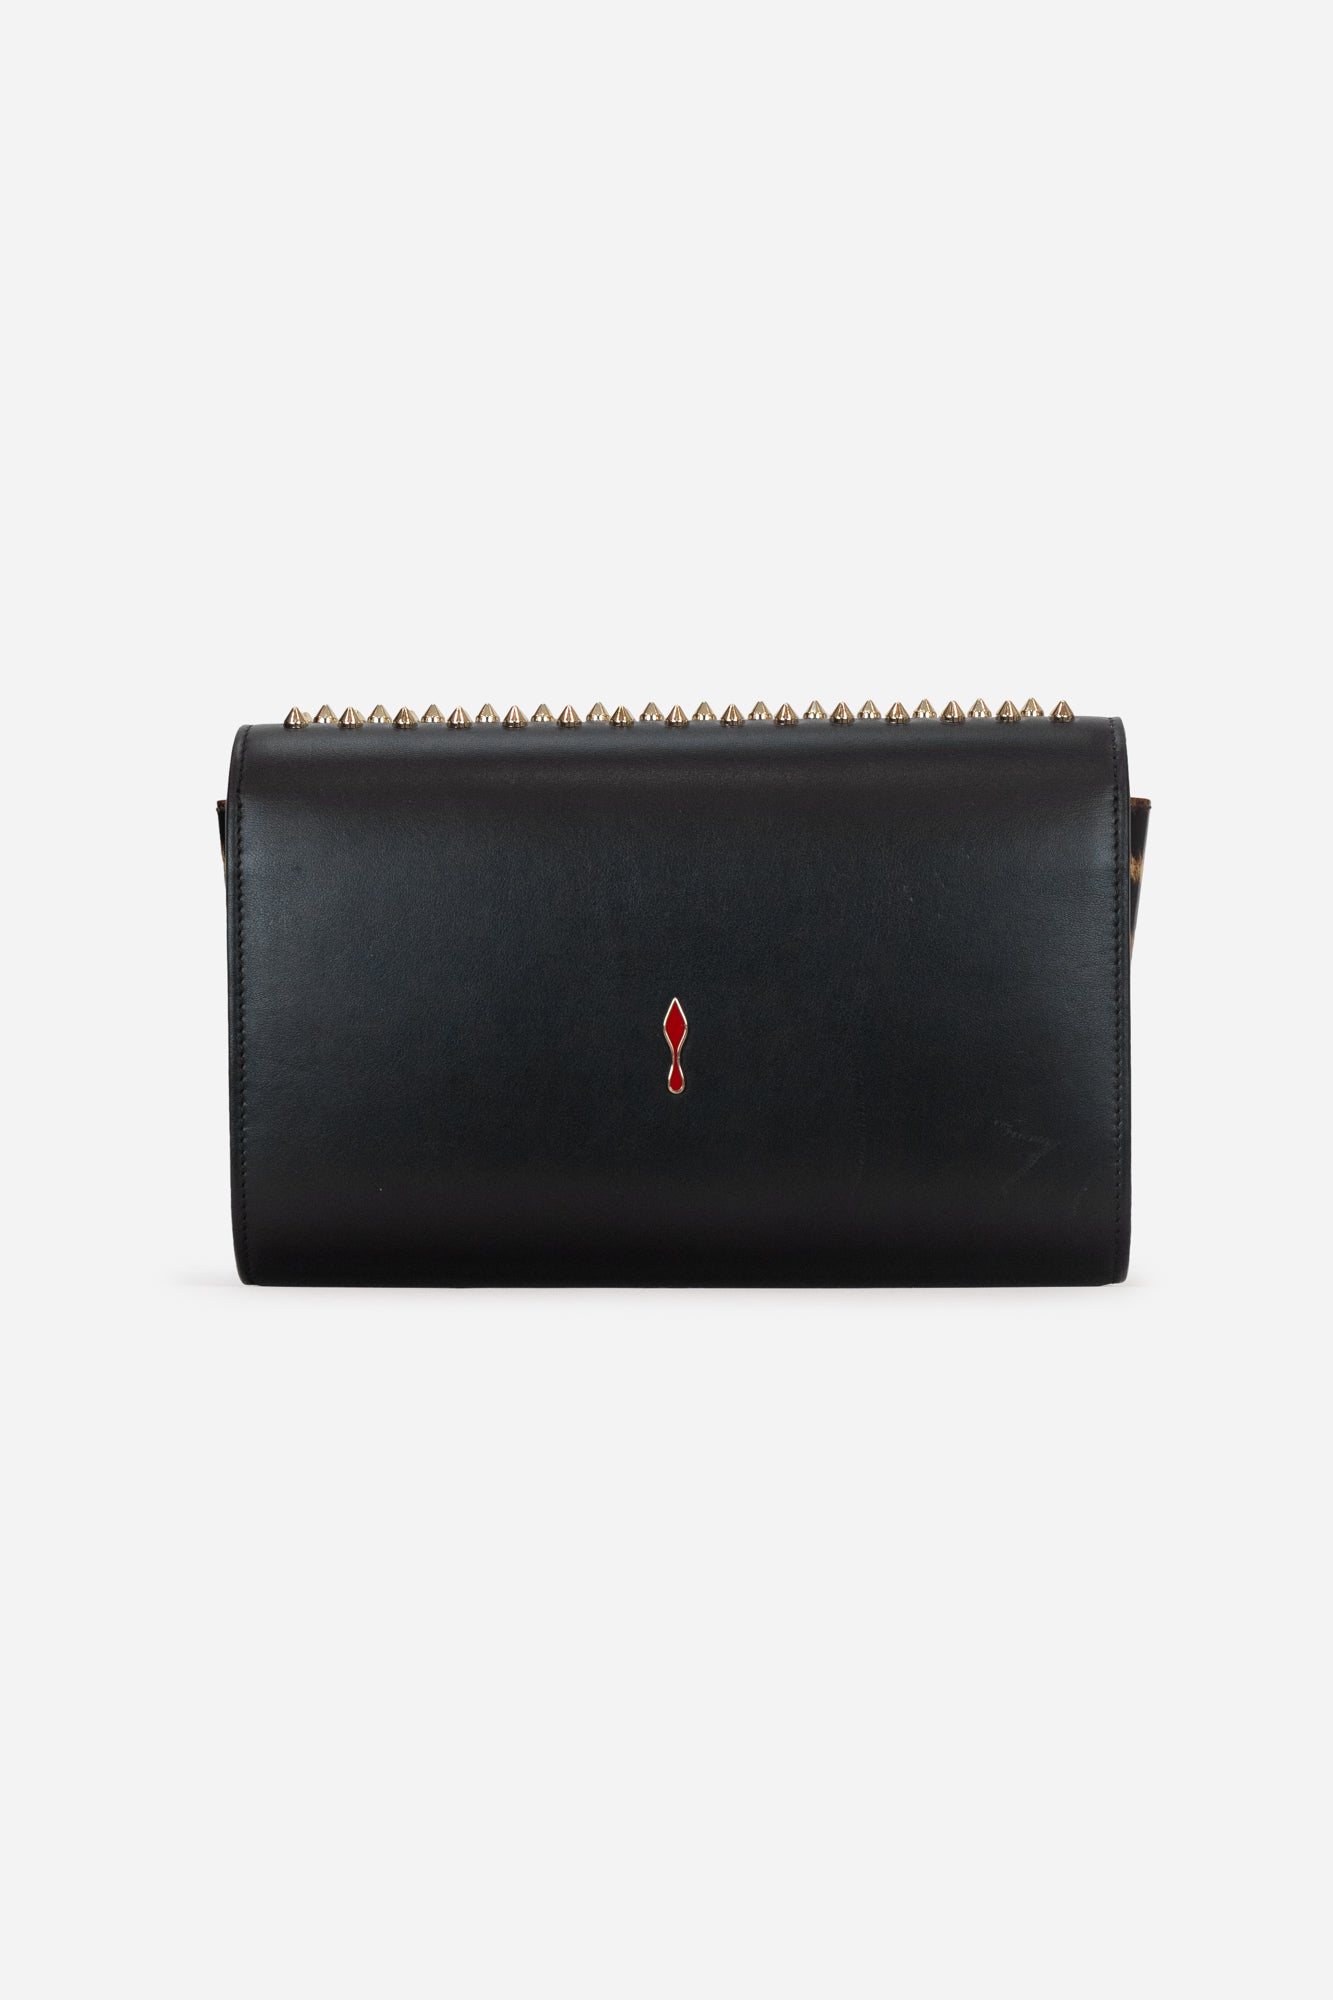 Leather Studded Clutch with Crossbody Chain